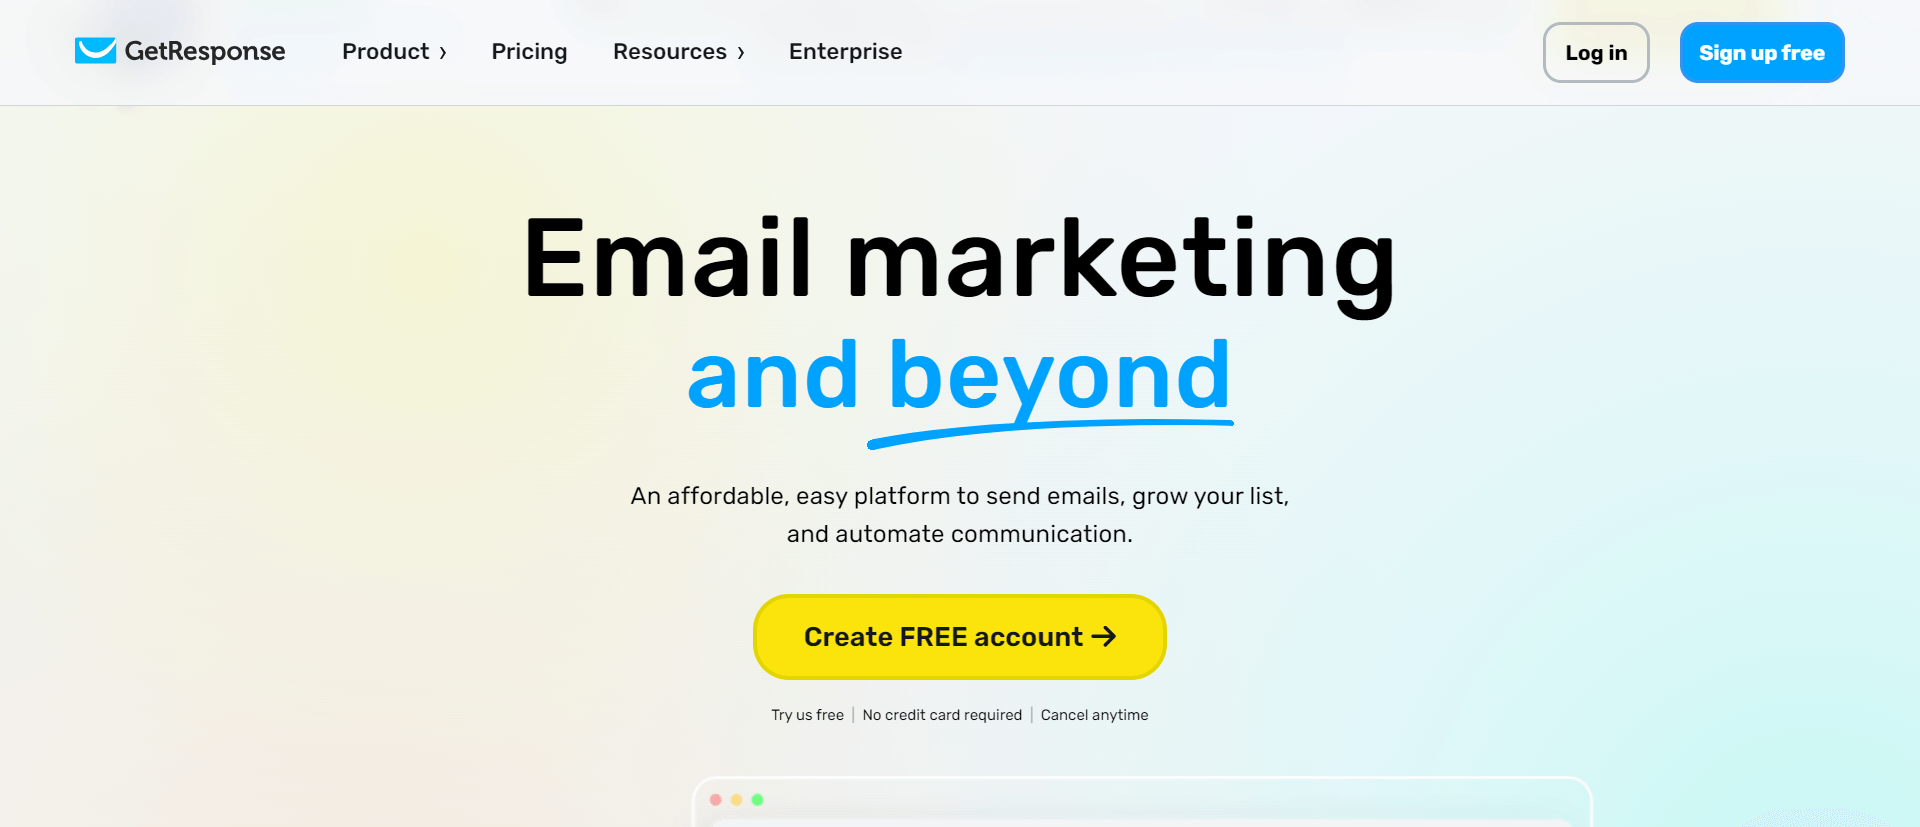 #9 GetResponse is the best email marketing platform for online stores